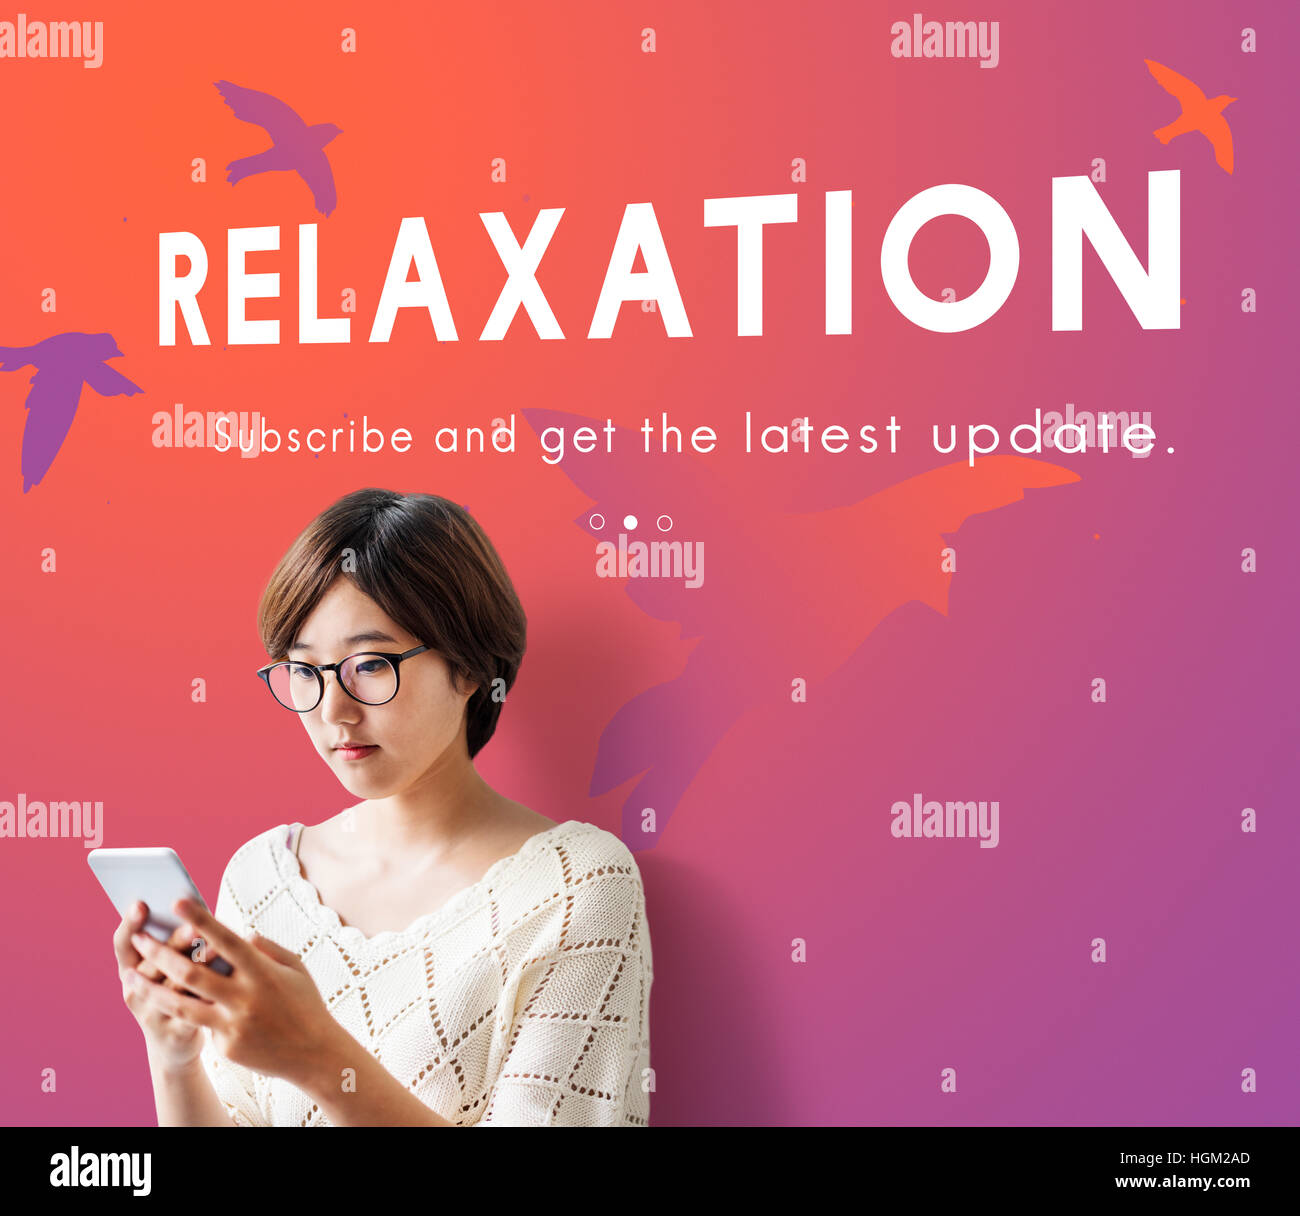 Relaxation Inspiration Peace Solitude Concept Stock Photo